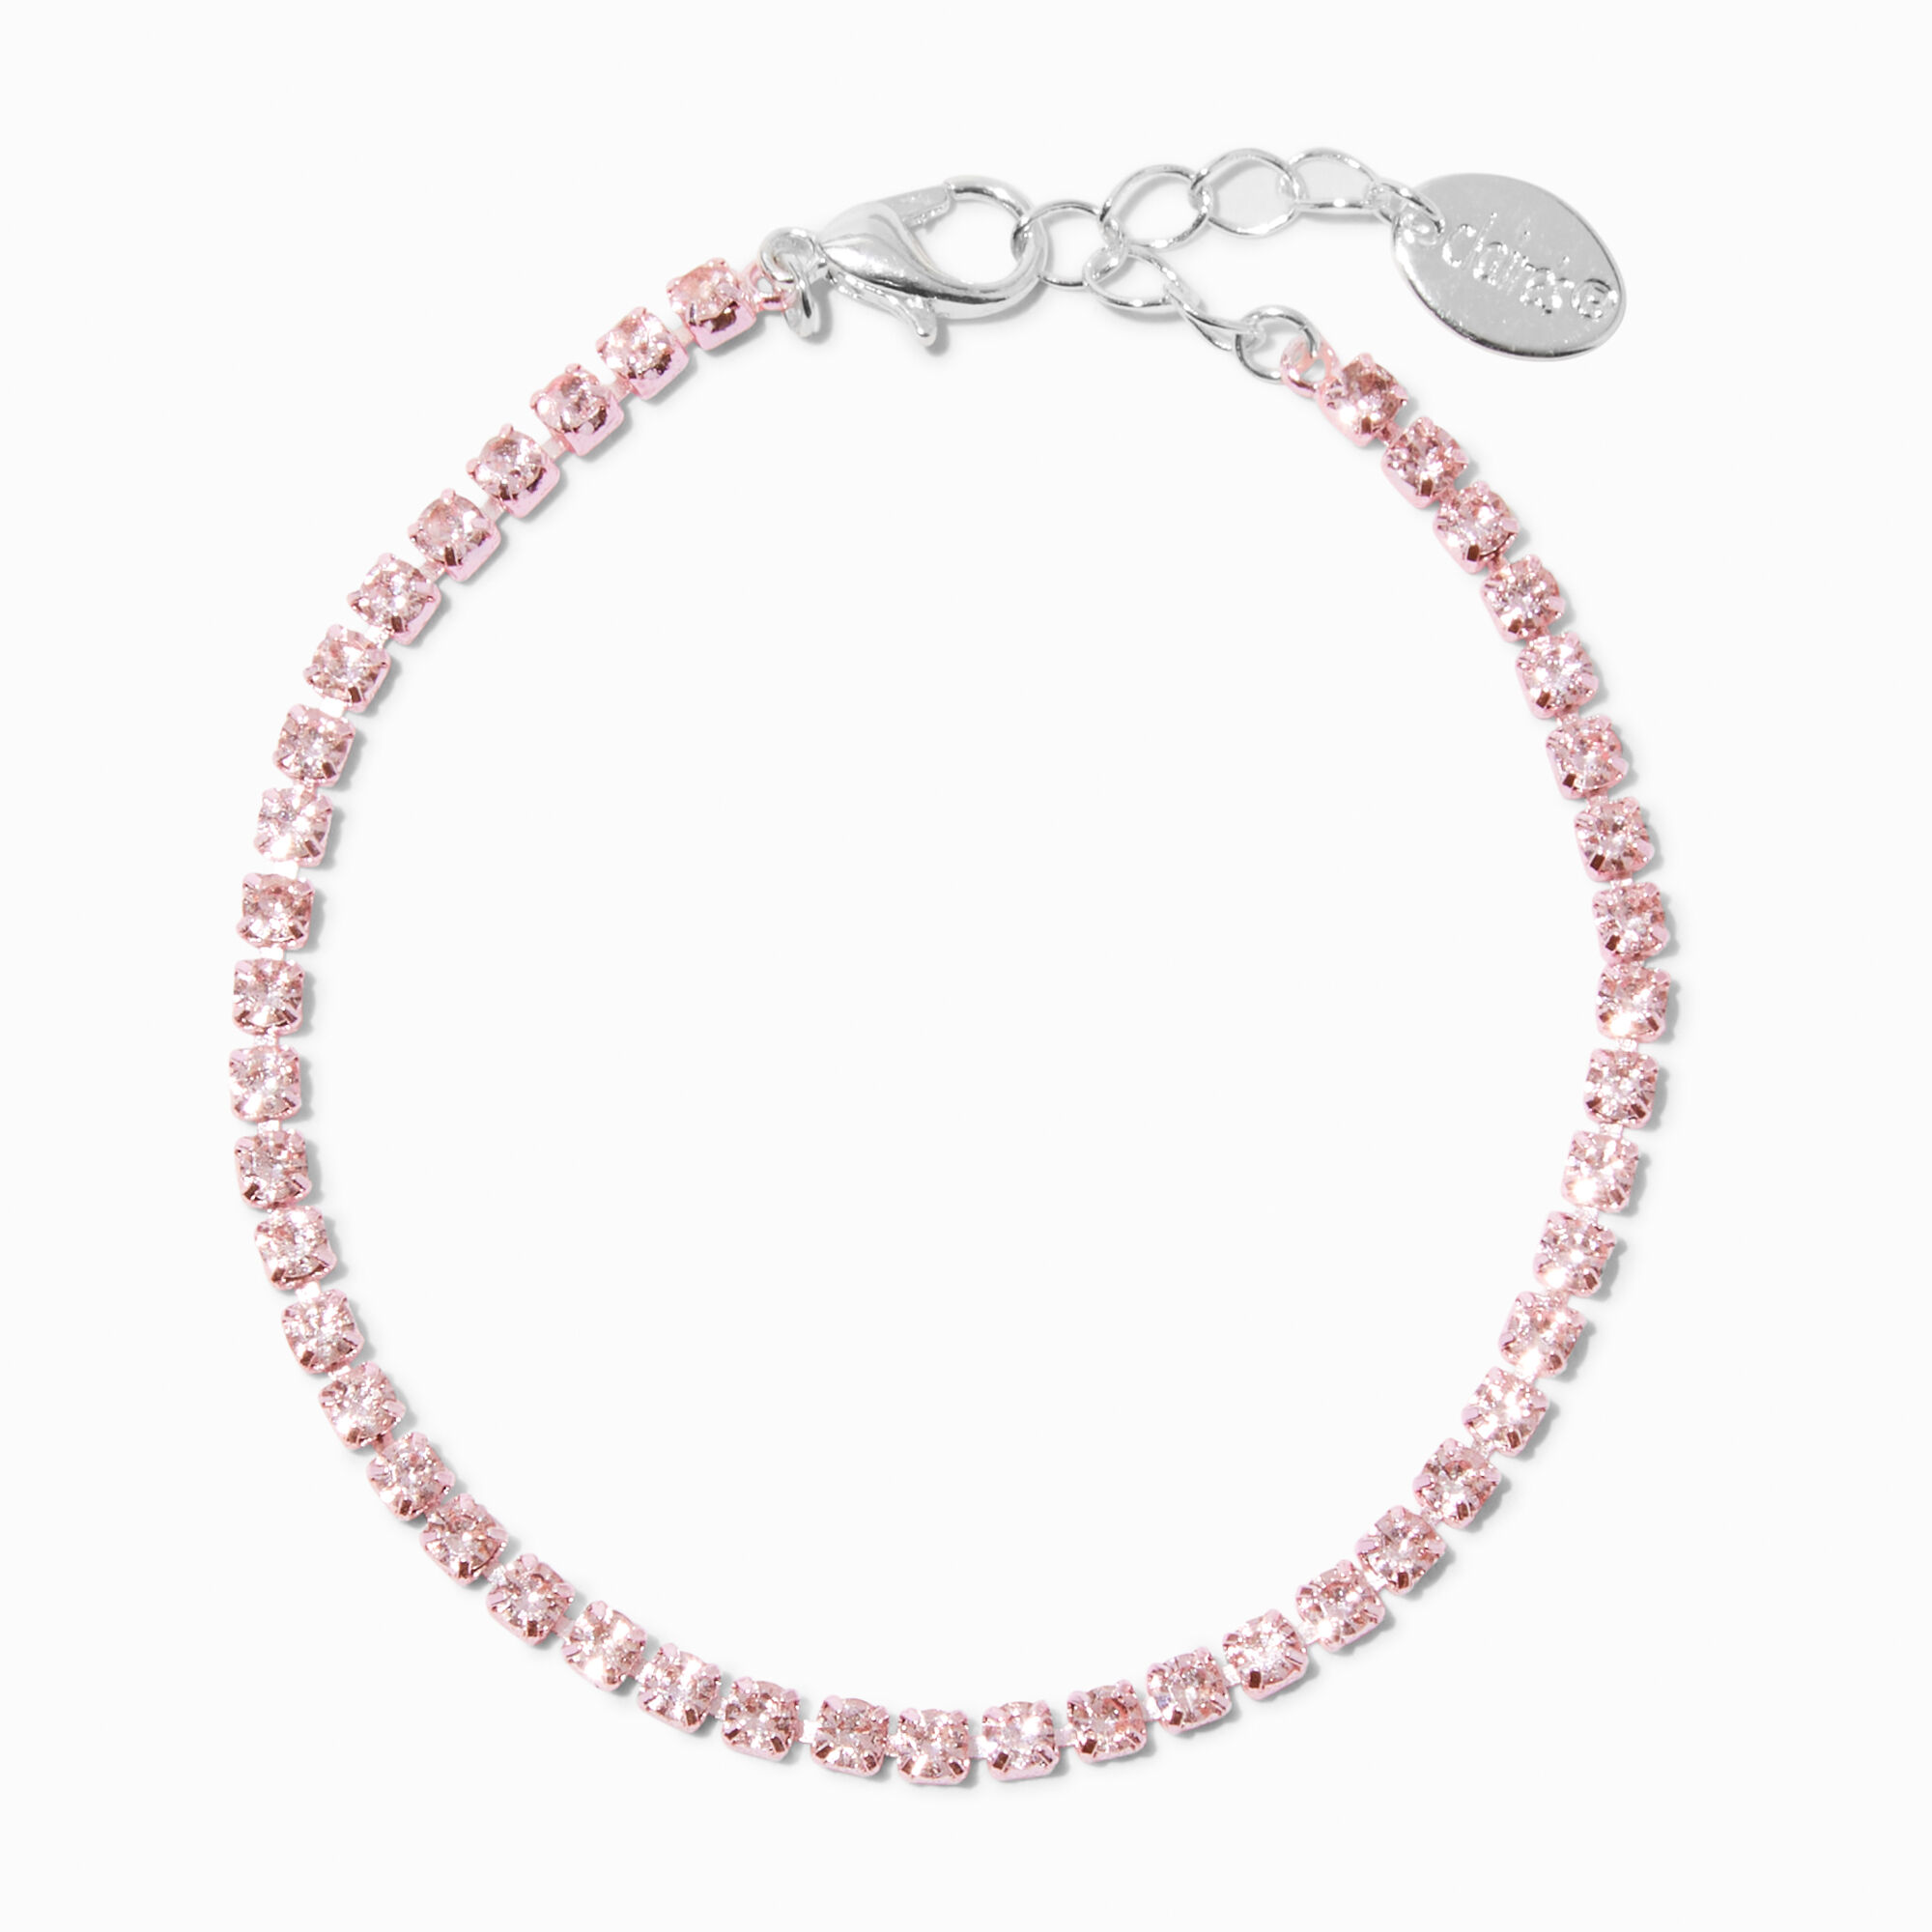 View Claires Pale Rhinestone Cup Chain Bracelet Pink information